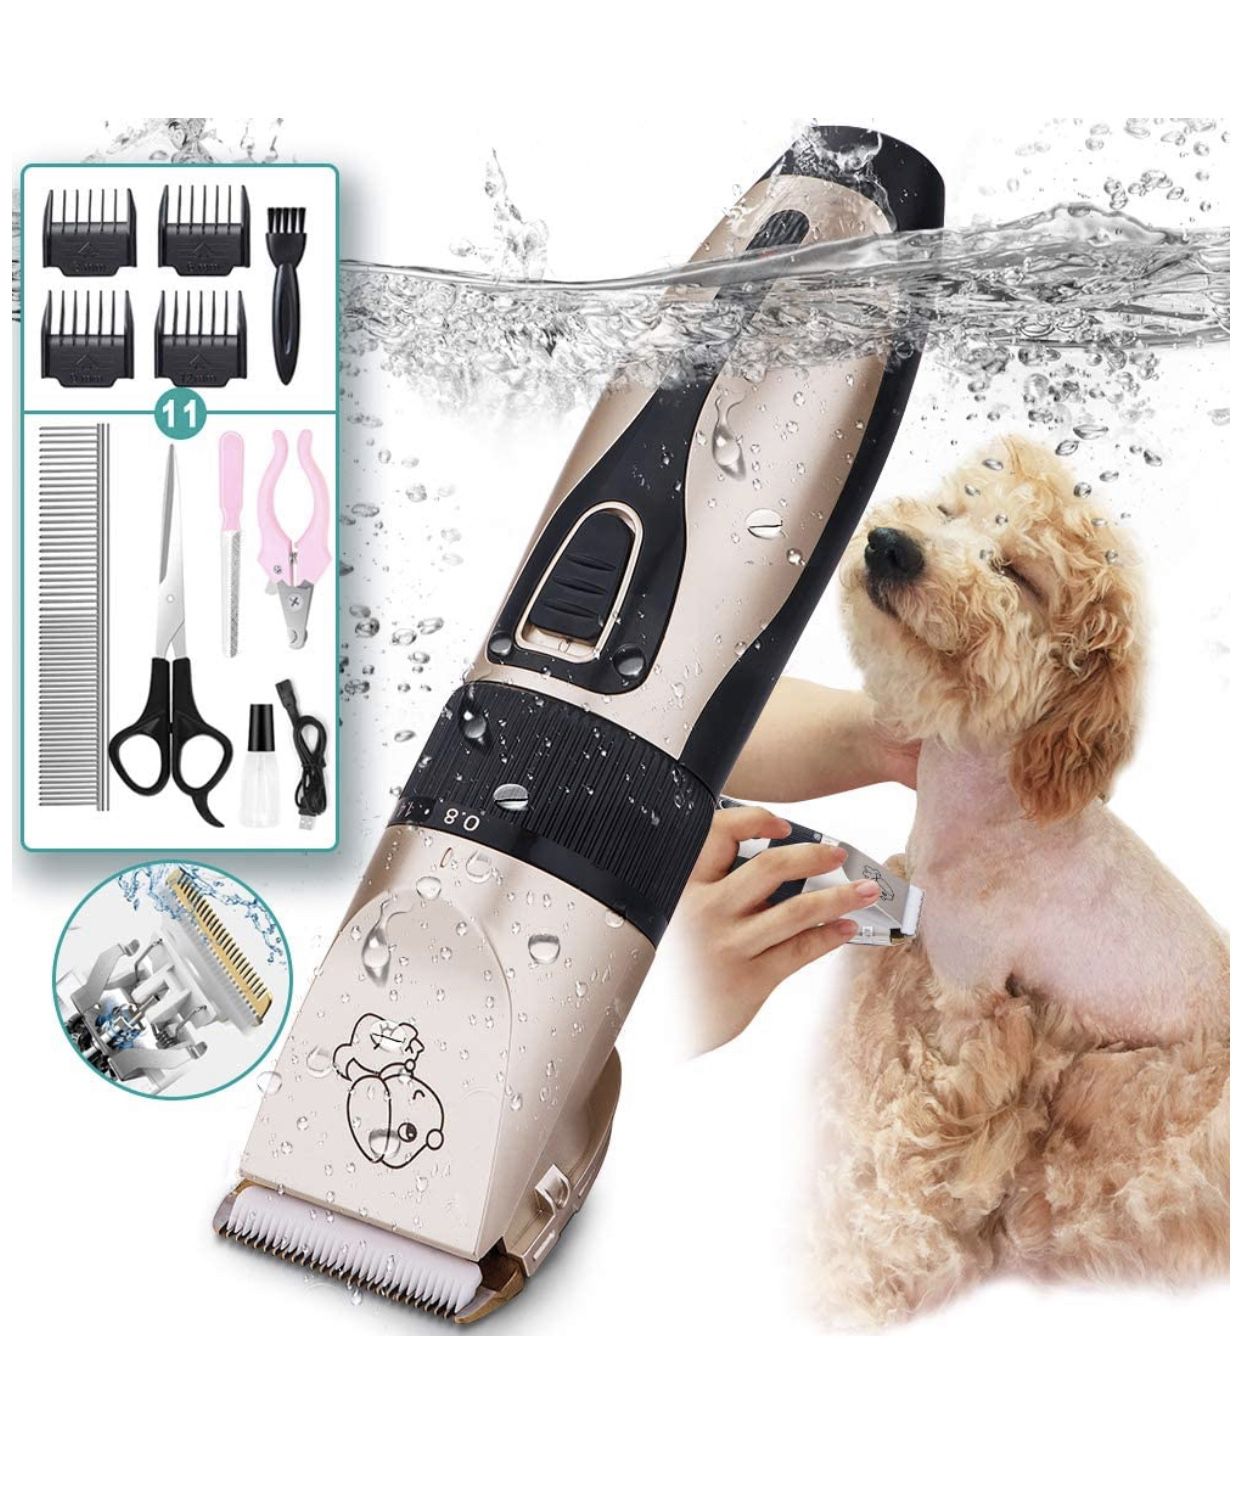 NEW- Hair Clippers for Grooming dogs/ Cats